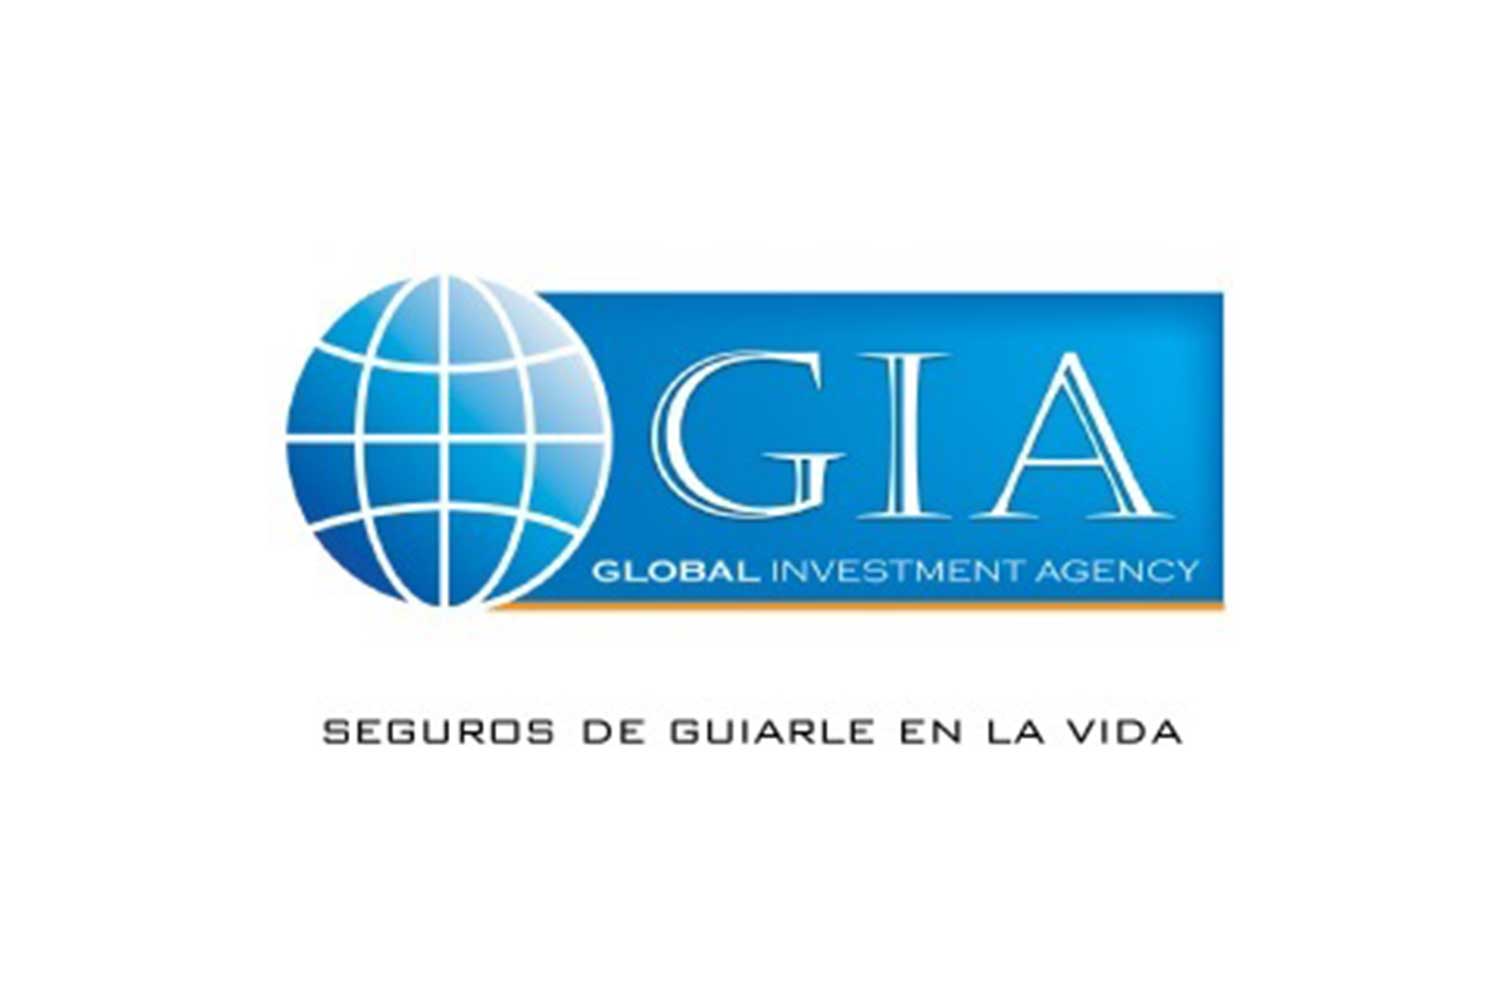 GLOBAL INVESTMENT AGENCY